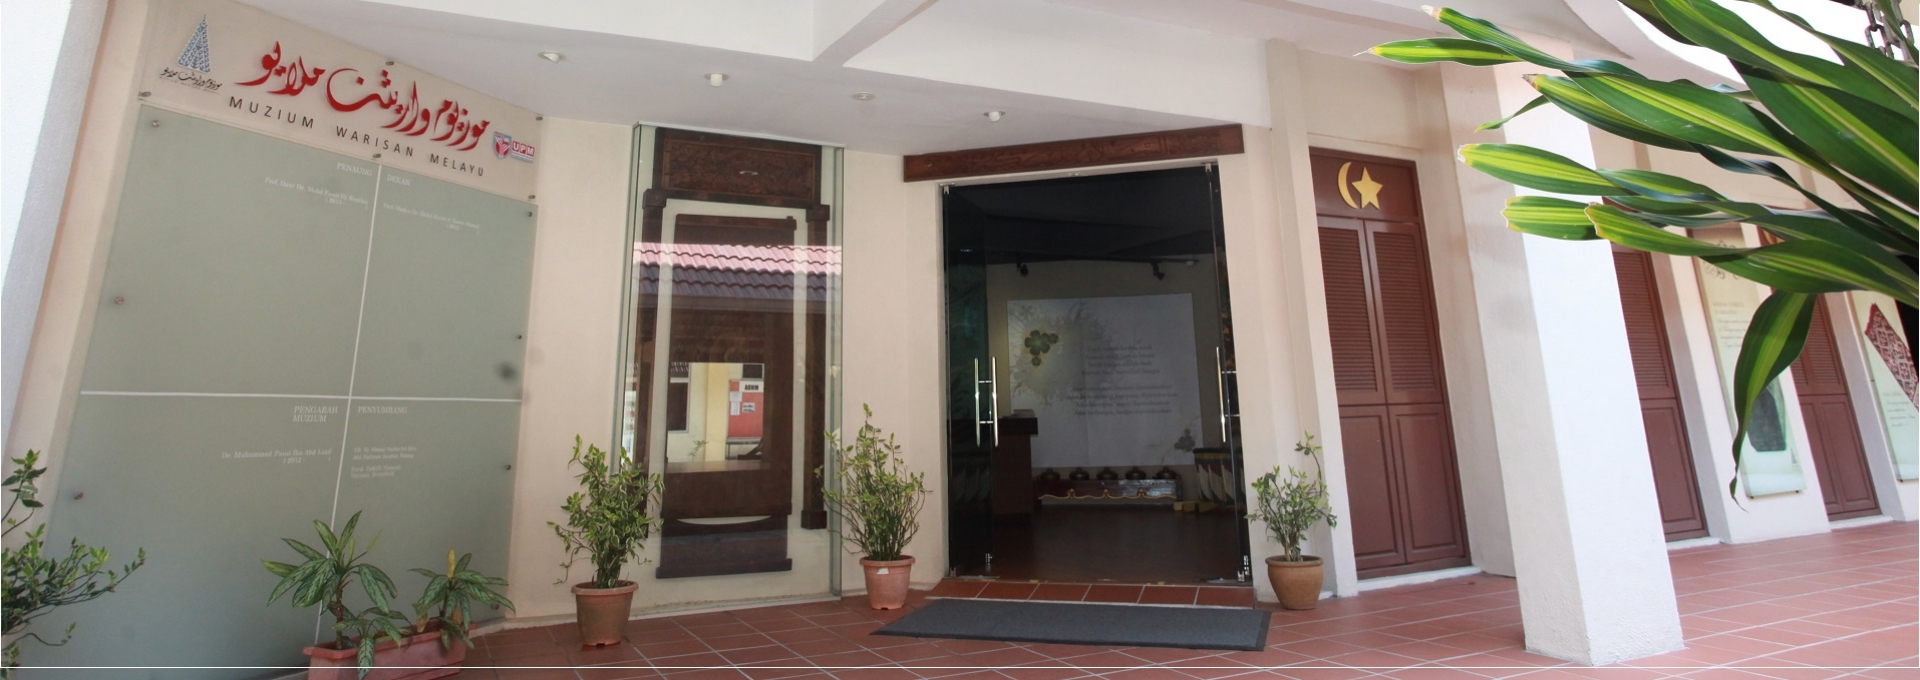 Entrance to the Malay Heritage Museum